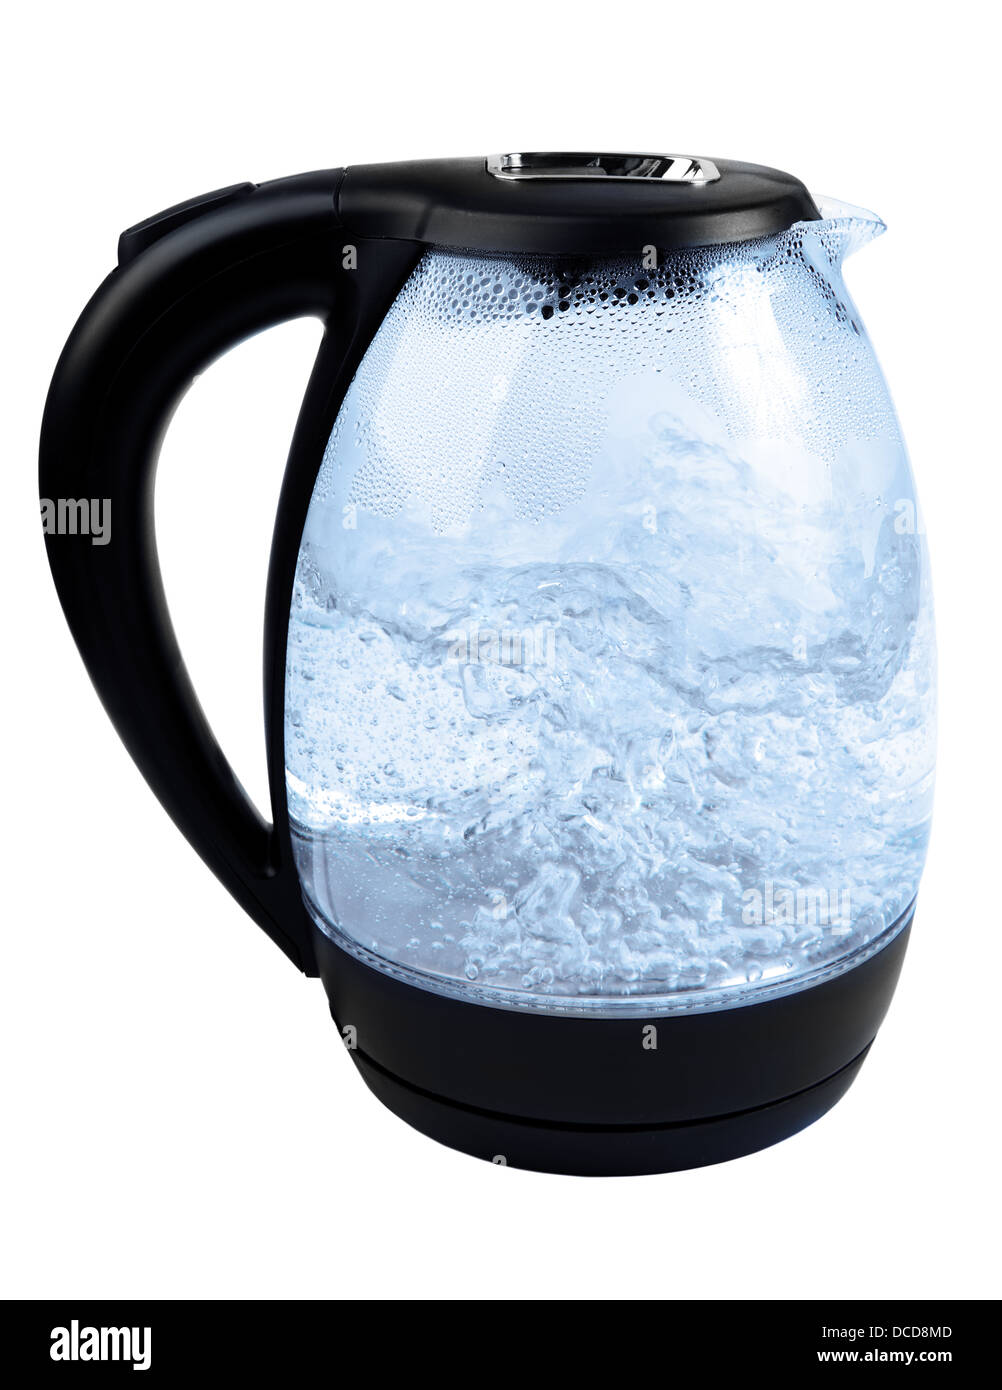 Modern kettle with blue illumination boiling water over white Stock Photo